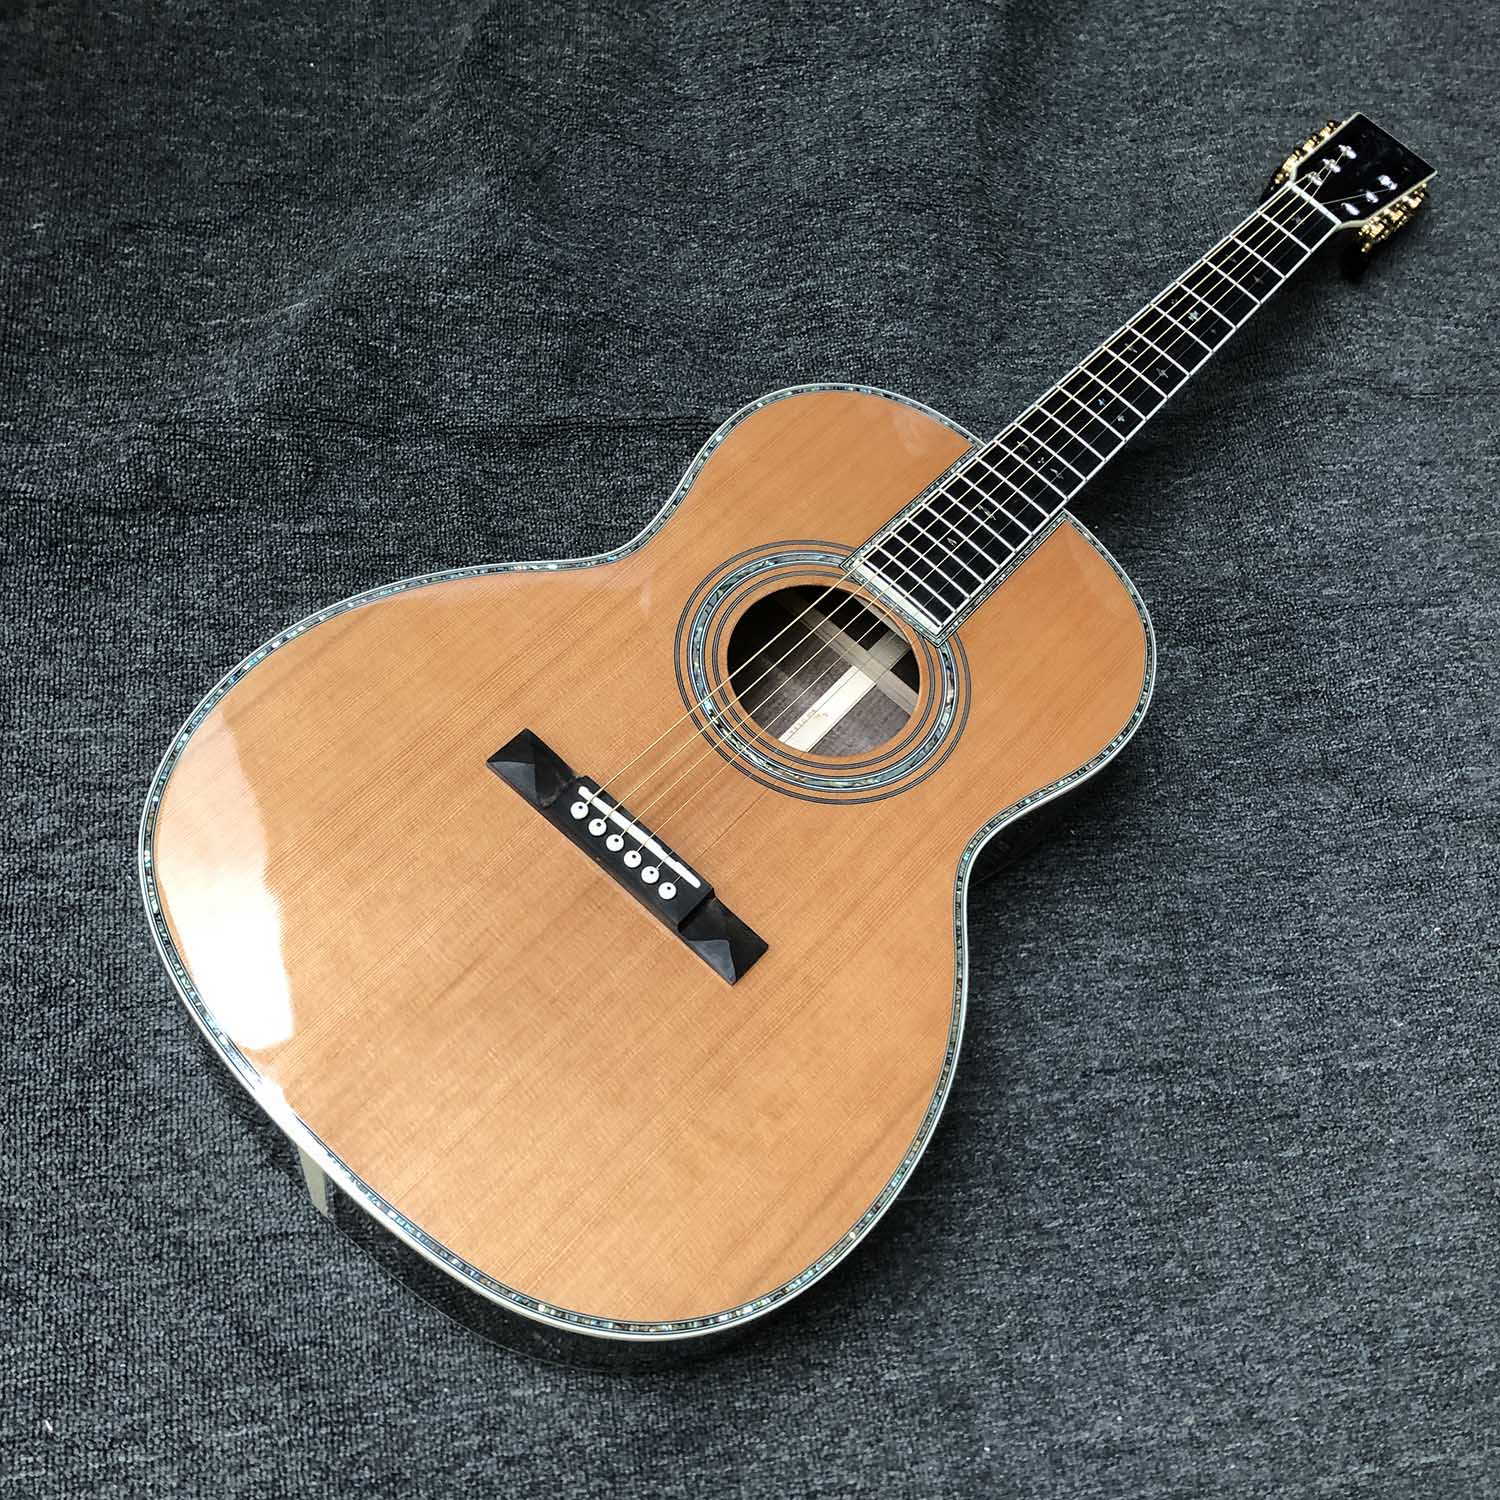 Solid Cedar Wood Acoustic Guitar with soundhole pickup 39 Inch OOO Body Style Life Tree Inlay Classic Folk Guitar Abalone Binding